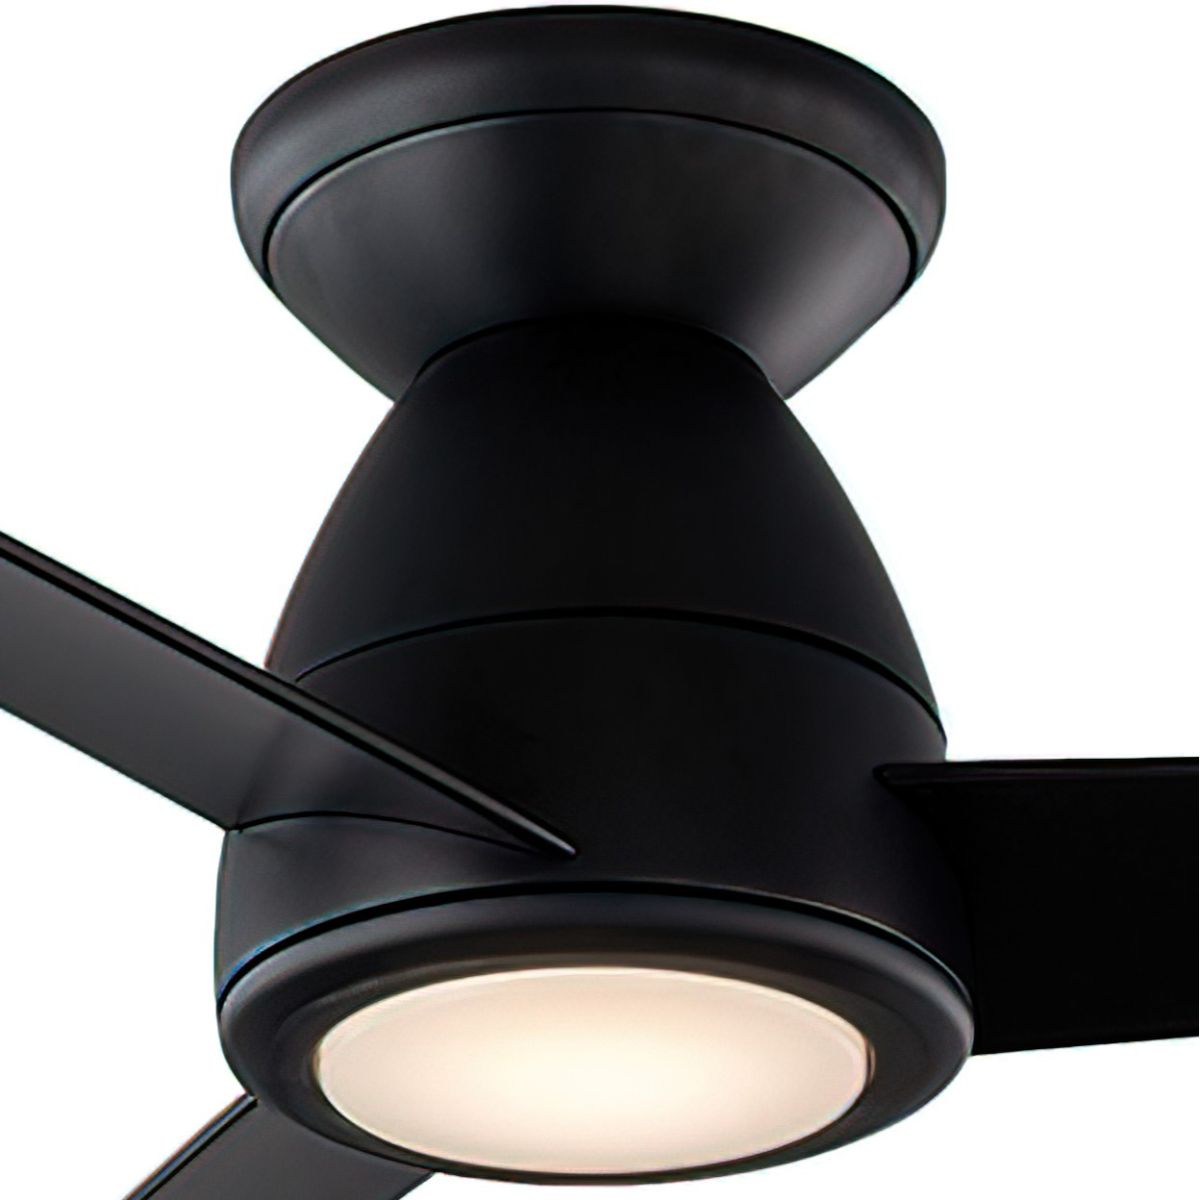 Tip-Top 44 Inch Modern Outdoor Smart Ceiling Fan With 3000K LED And Remote